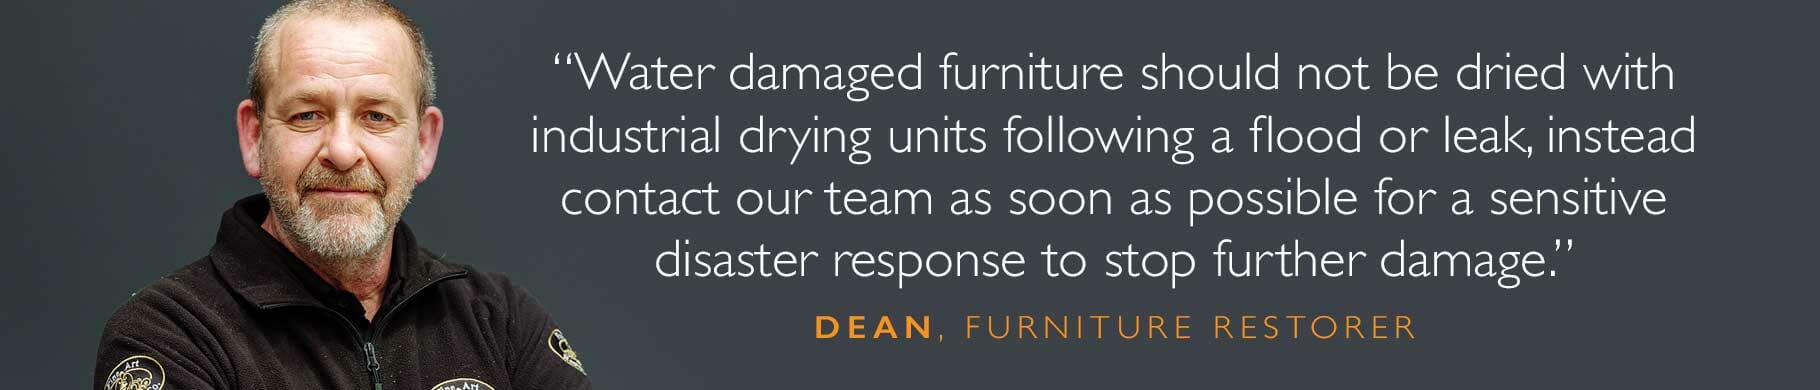 Dean water damaged furniture quote